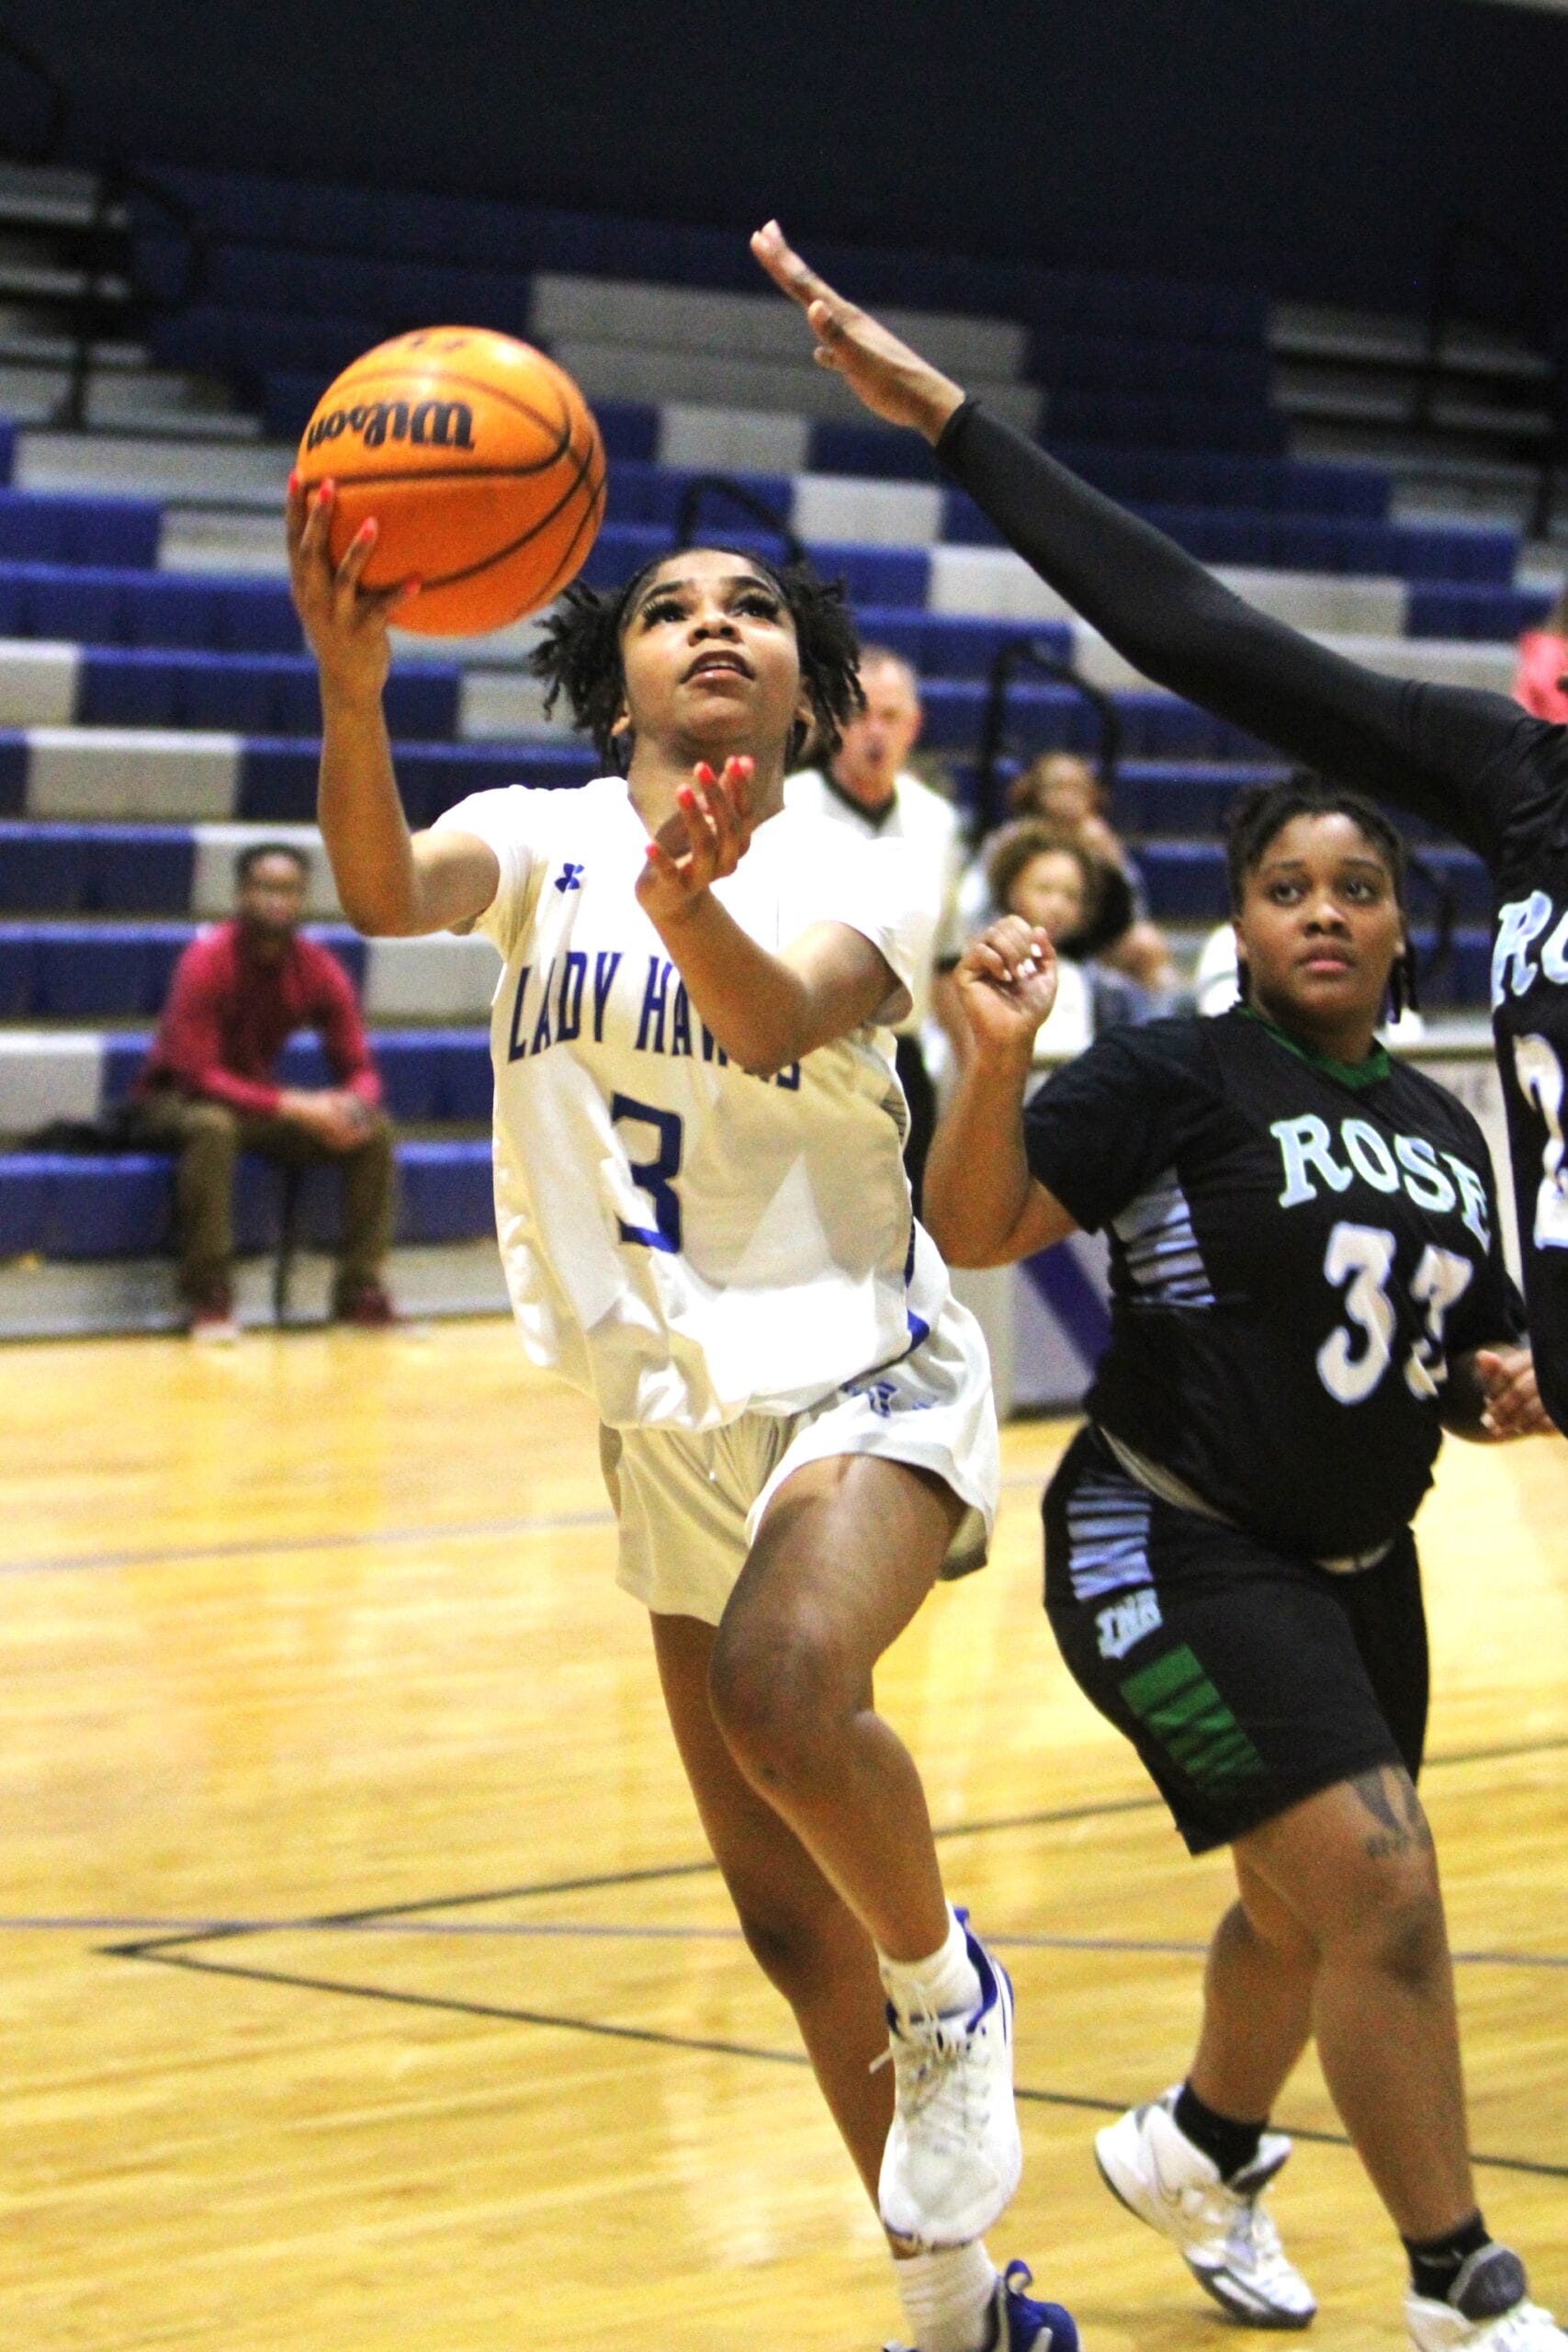 Lady Hawks surge into second round by downing Rose Rampants, 65-31